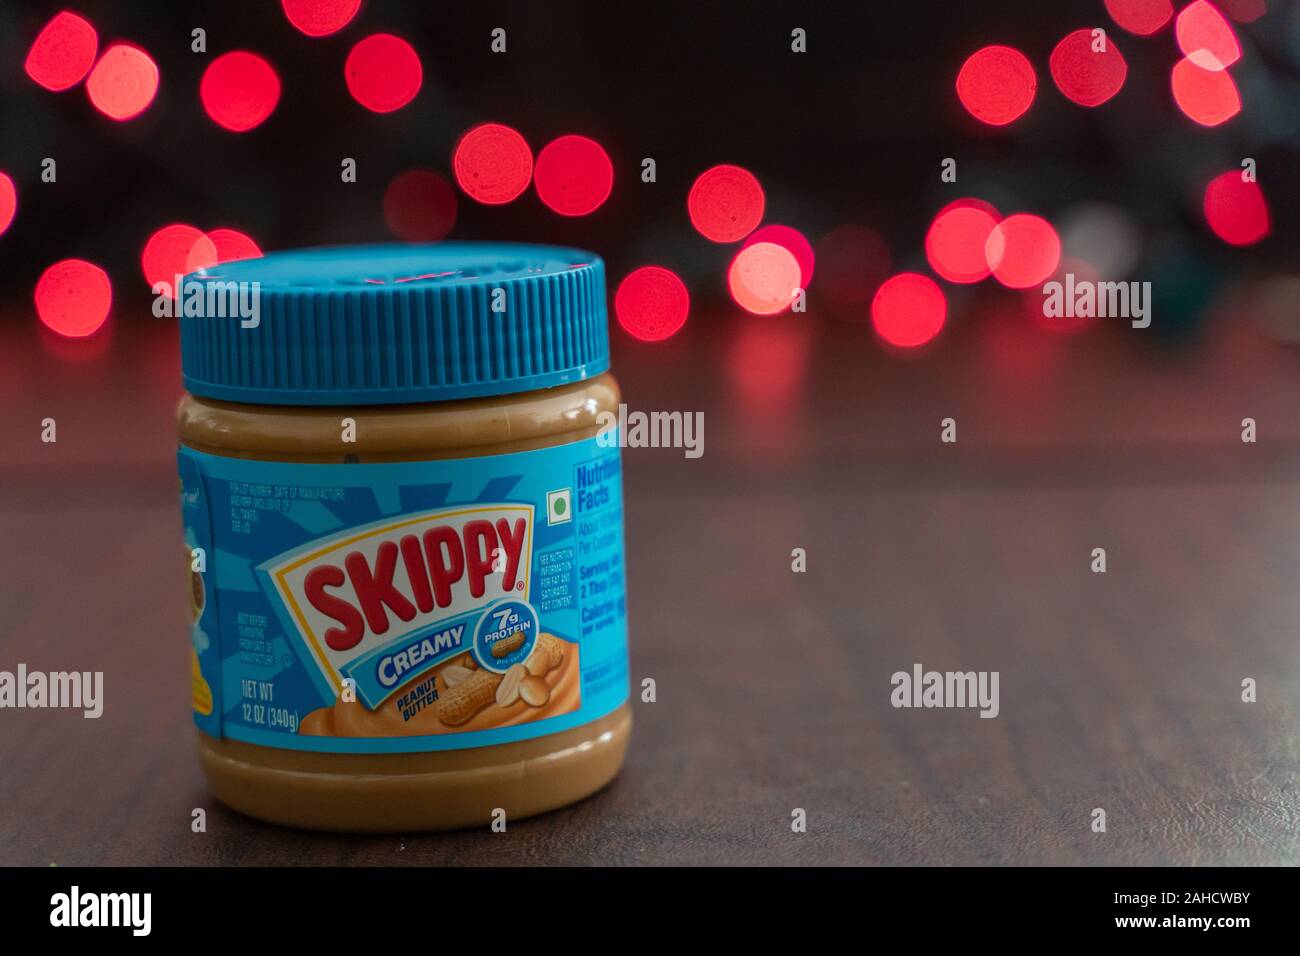 Minneapolis, Minnesota - December 23, 2019: Skippy brand peanut butter sitting on a table, red bokeh balls in the background Stock Photo